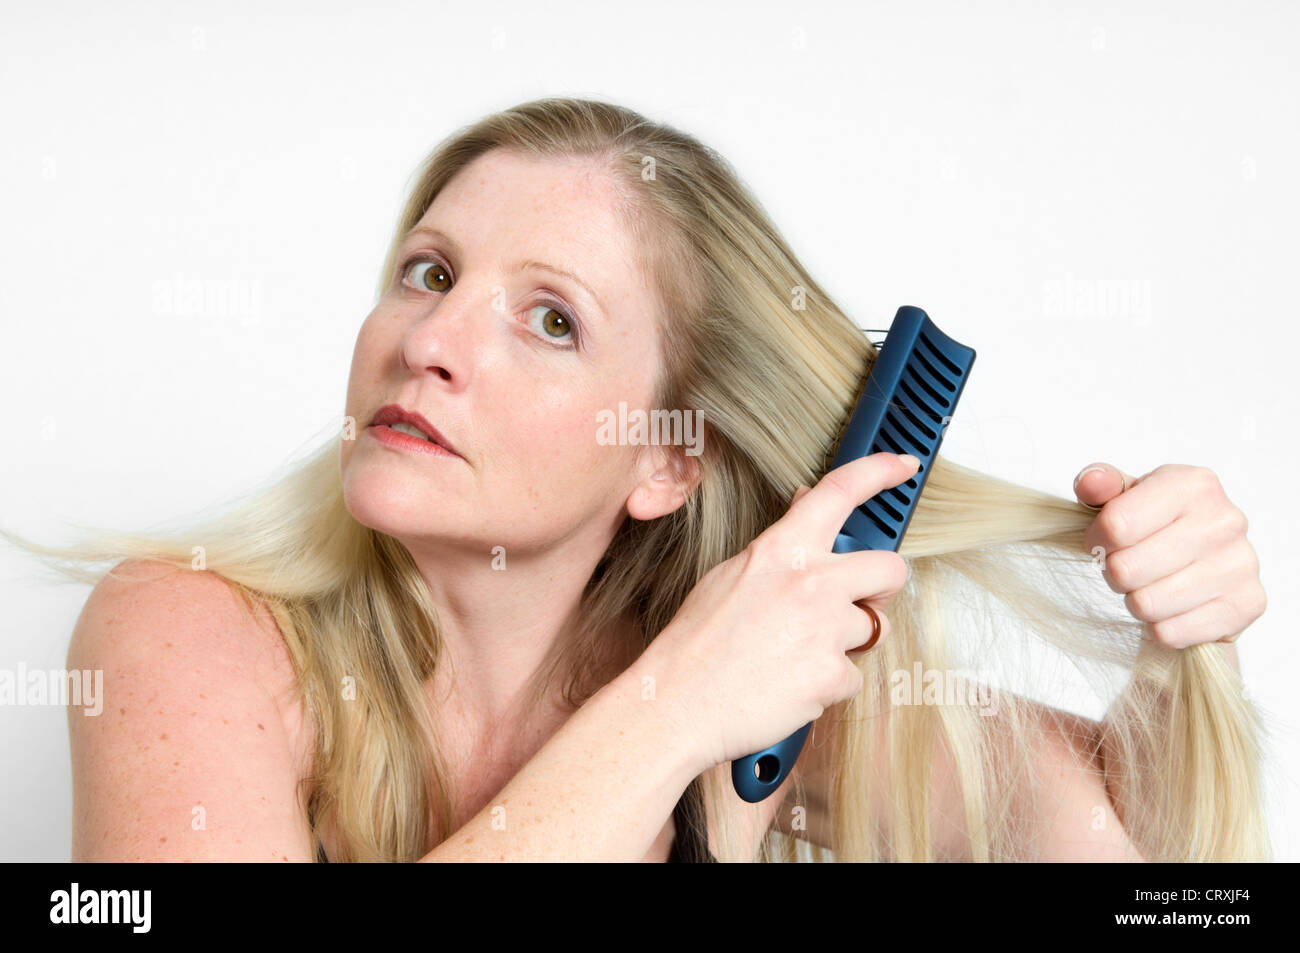 Studio shot of attractive young Caucasian woman brushing hair against a white background Stock Photo